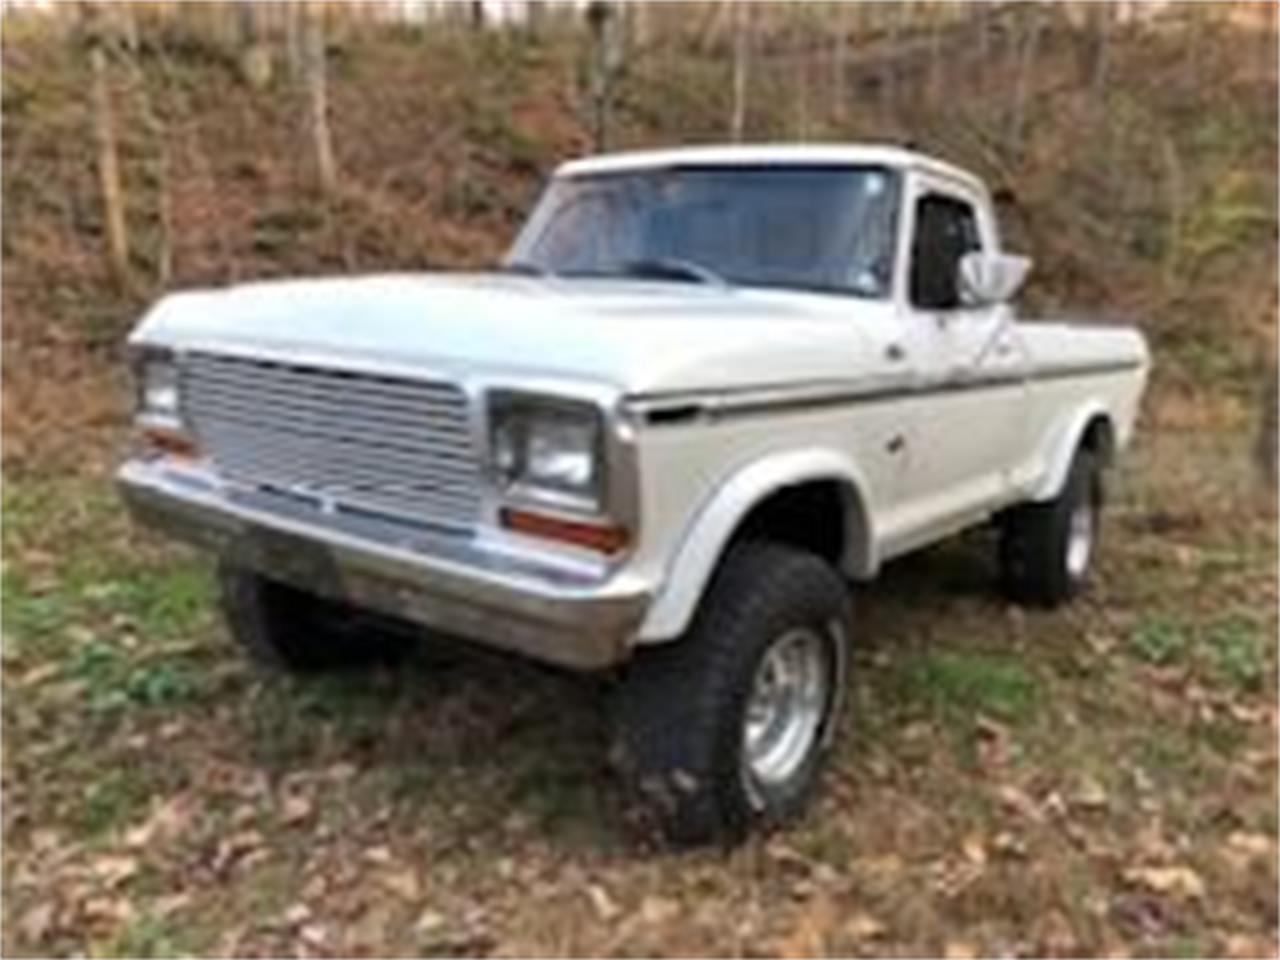 For Sale: 1979 Ford F150 in Cadillac, Michigan for sale in Cadillac, MI